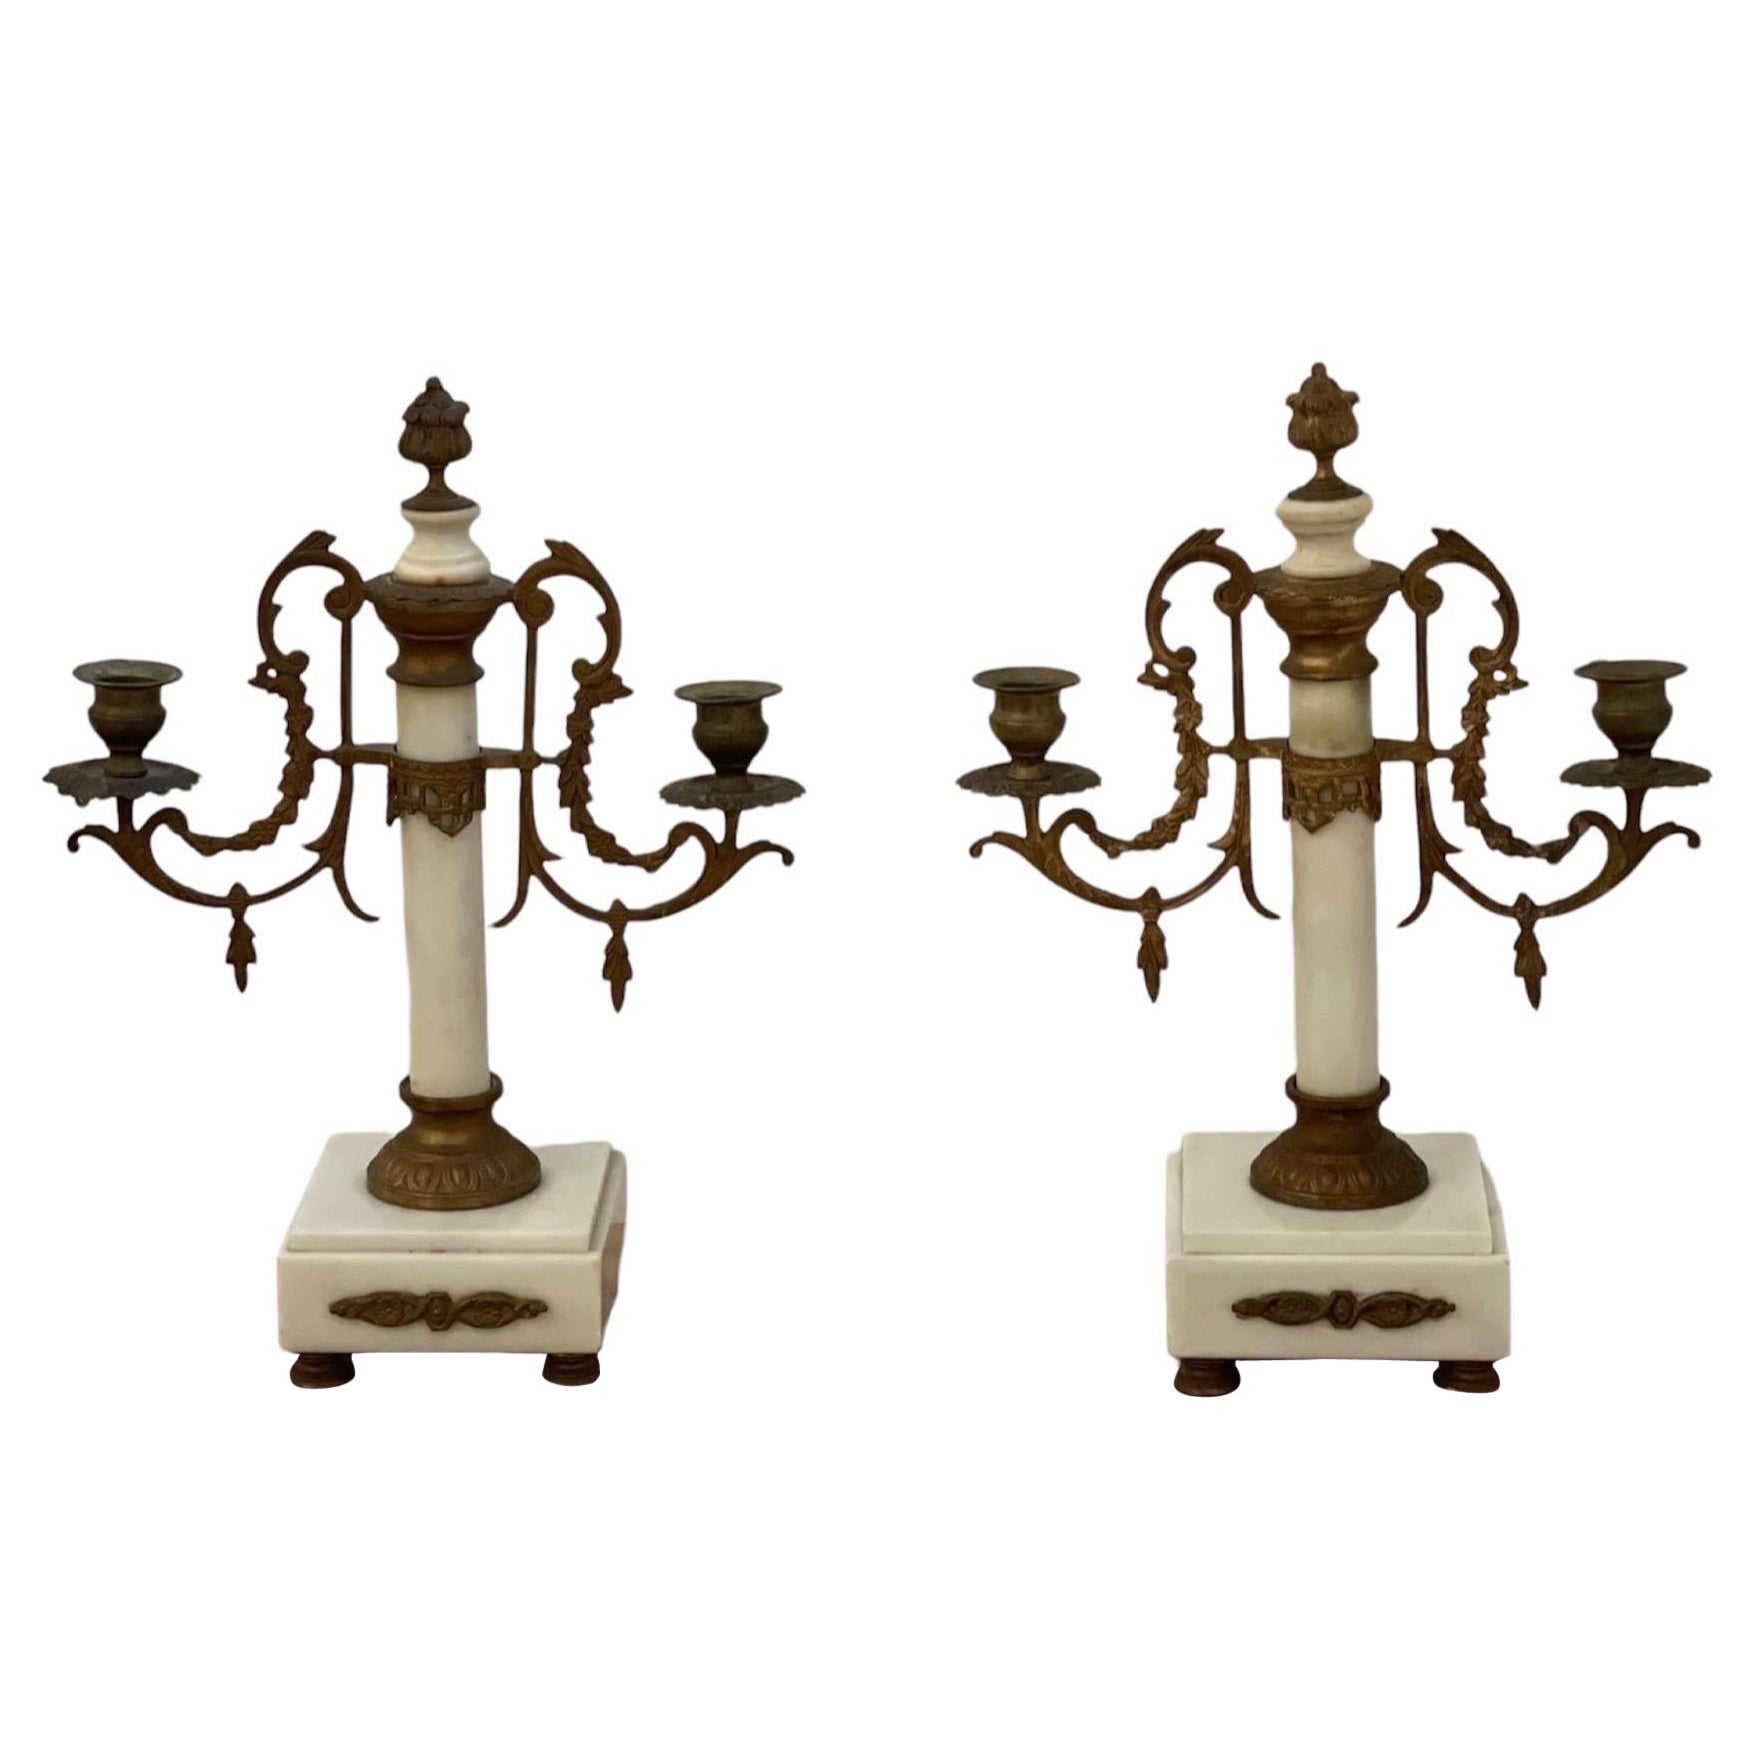 Pair of Louis XVI 19th Century Gilt-Bronze and Gilt-Metal and Marble Candelabra For Sale